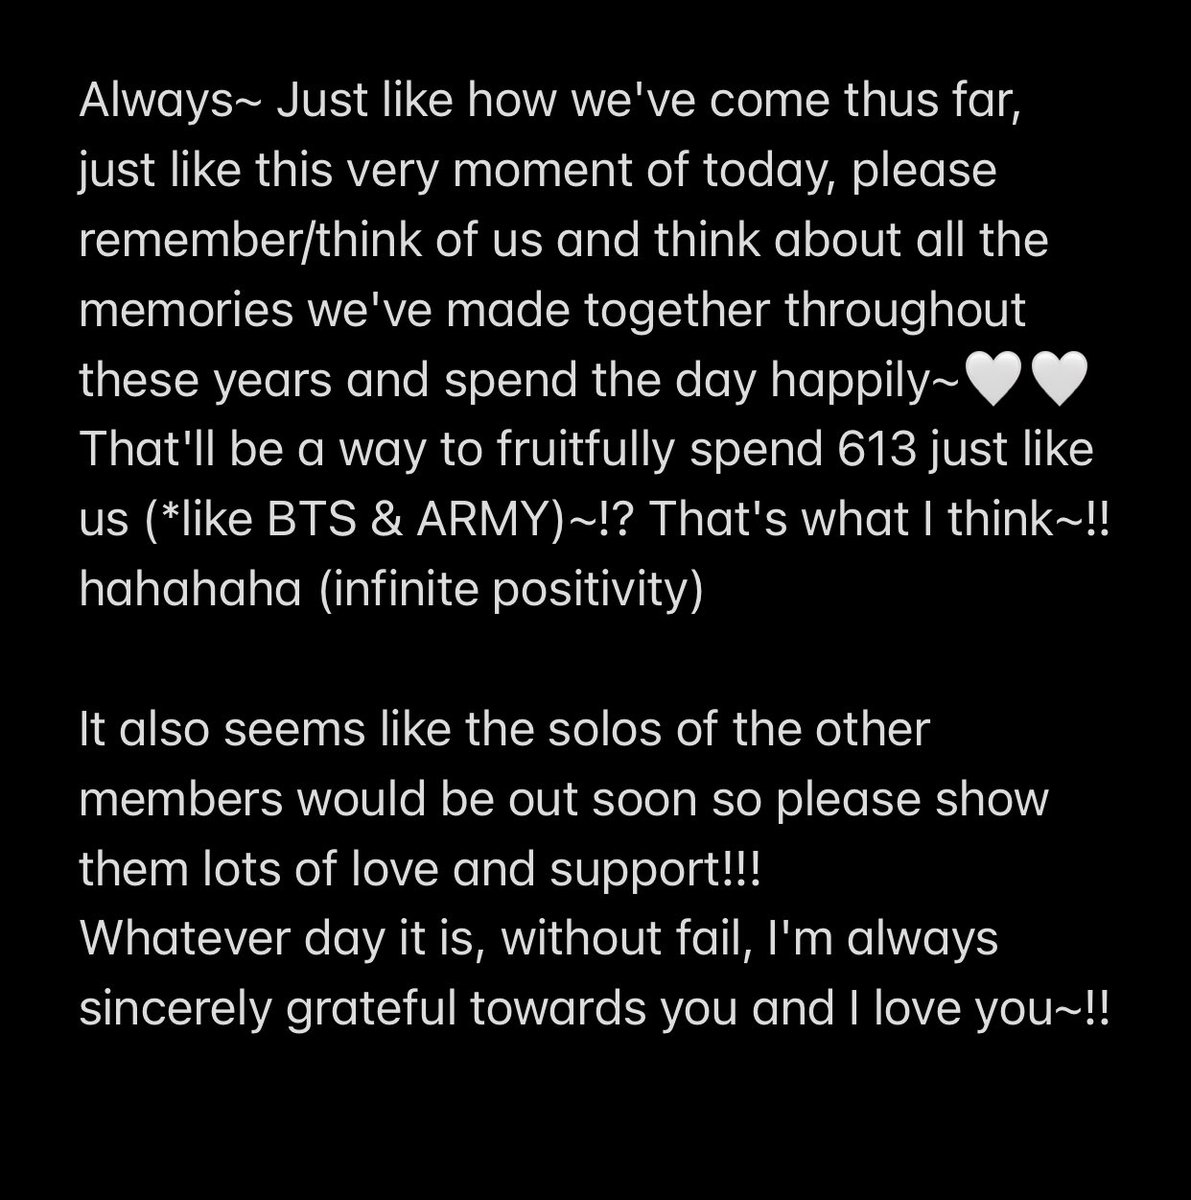 hoseok's letter to armys 🐿️💜

i miss hobi so so so much i'm glad we'll be able to receive letters from him like this he's truly the sweetest and fills up our days with so much warmth ☀️💕